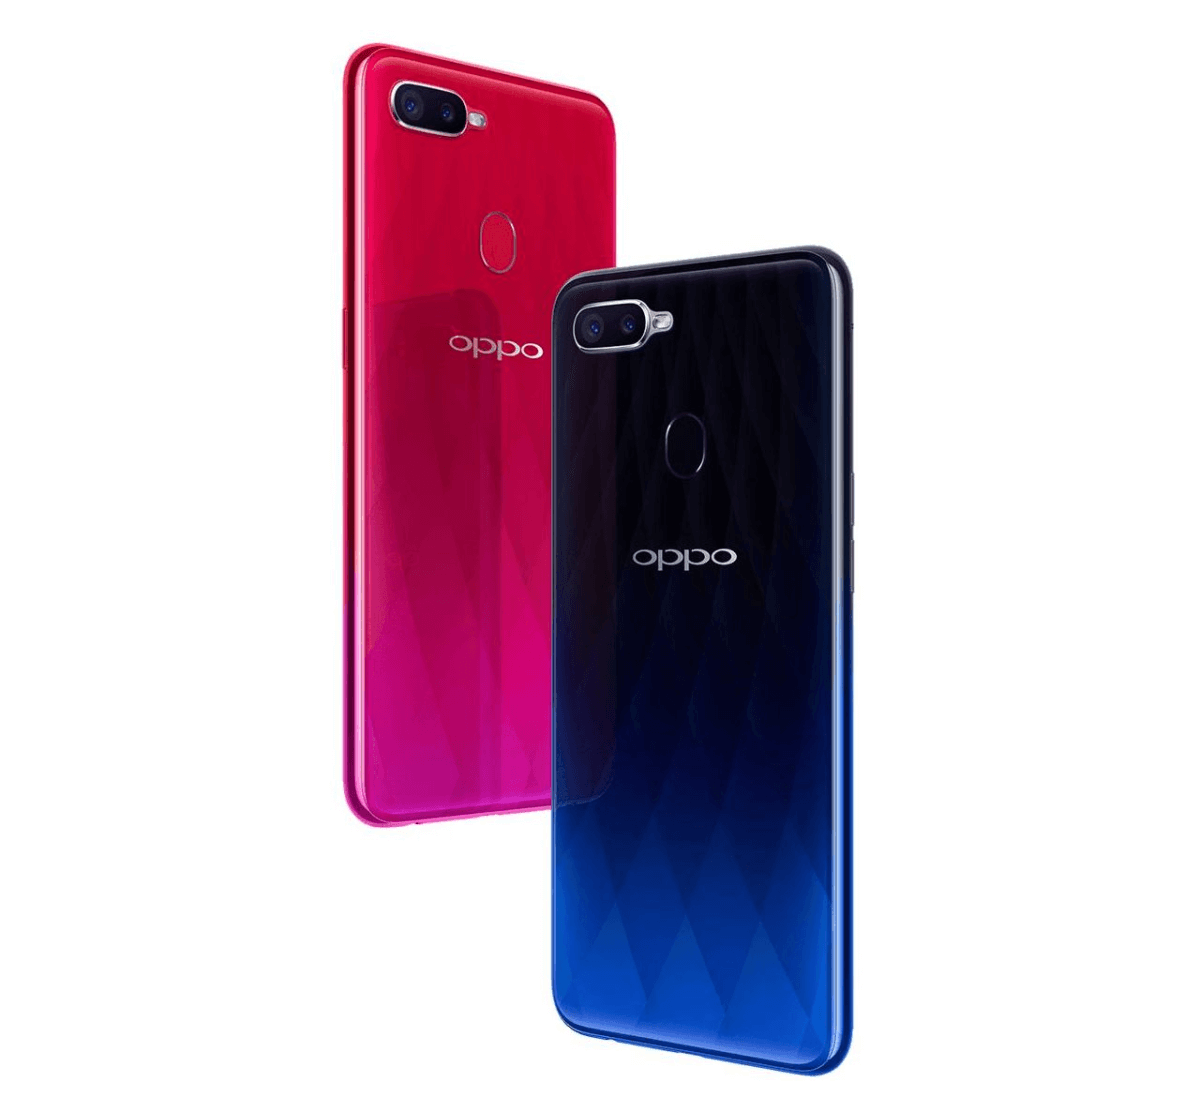 Oppo F9 official